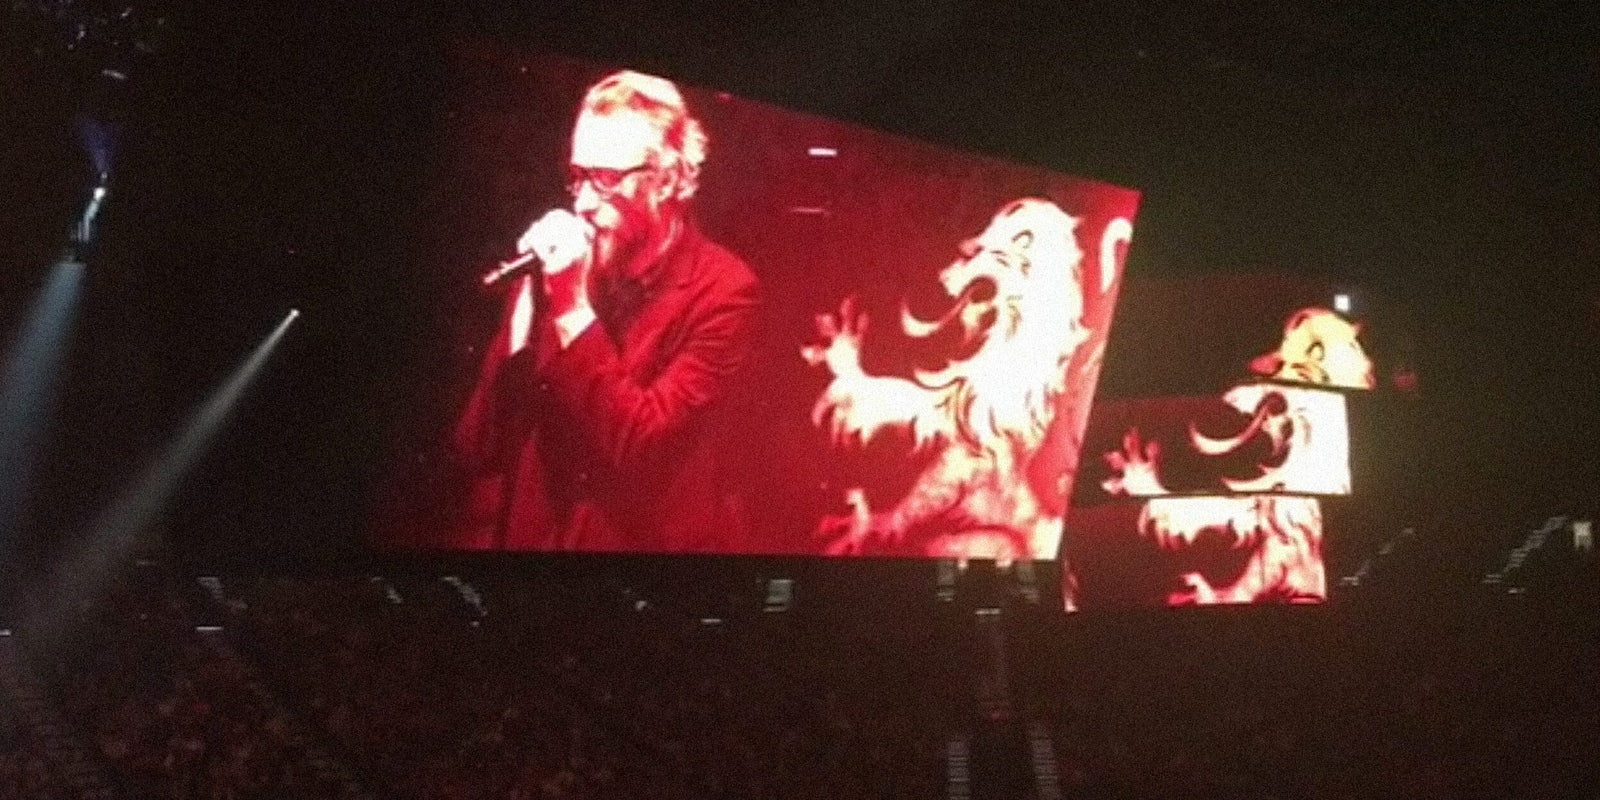 The National performs Rains of Castamere from Game of Thrones